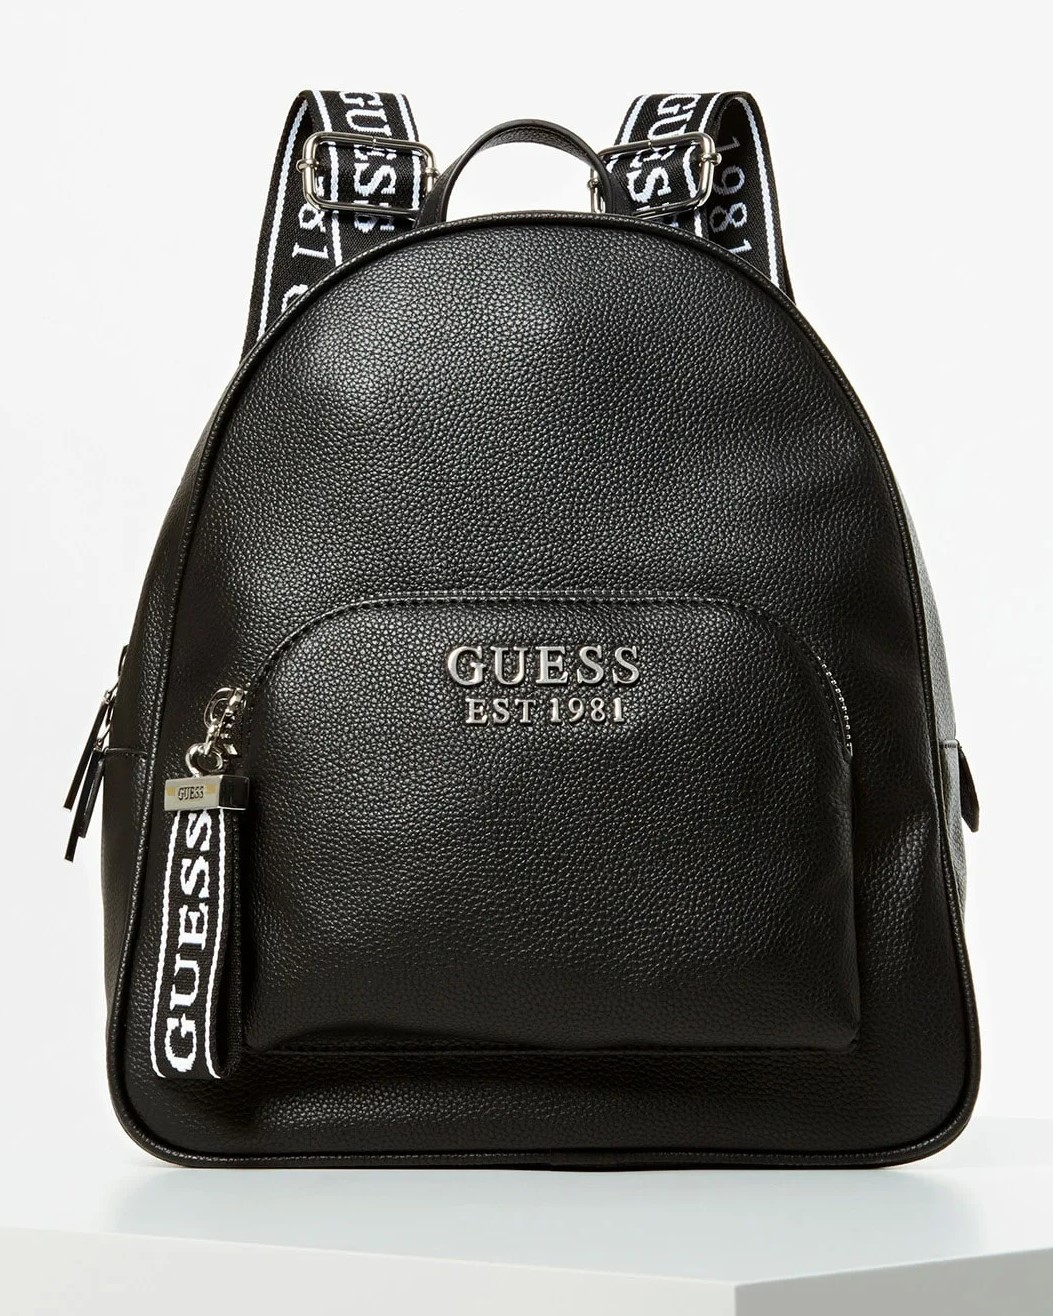 BALO NỮ GUESS BACKPACK 5